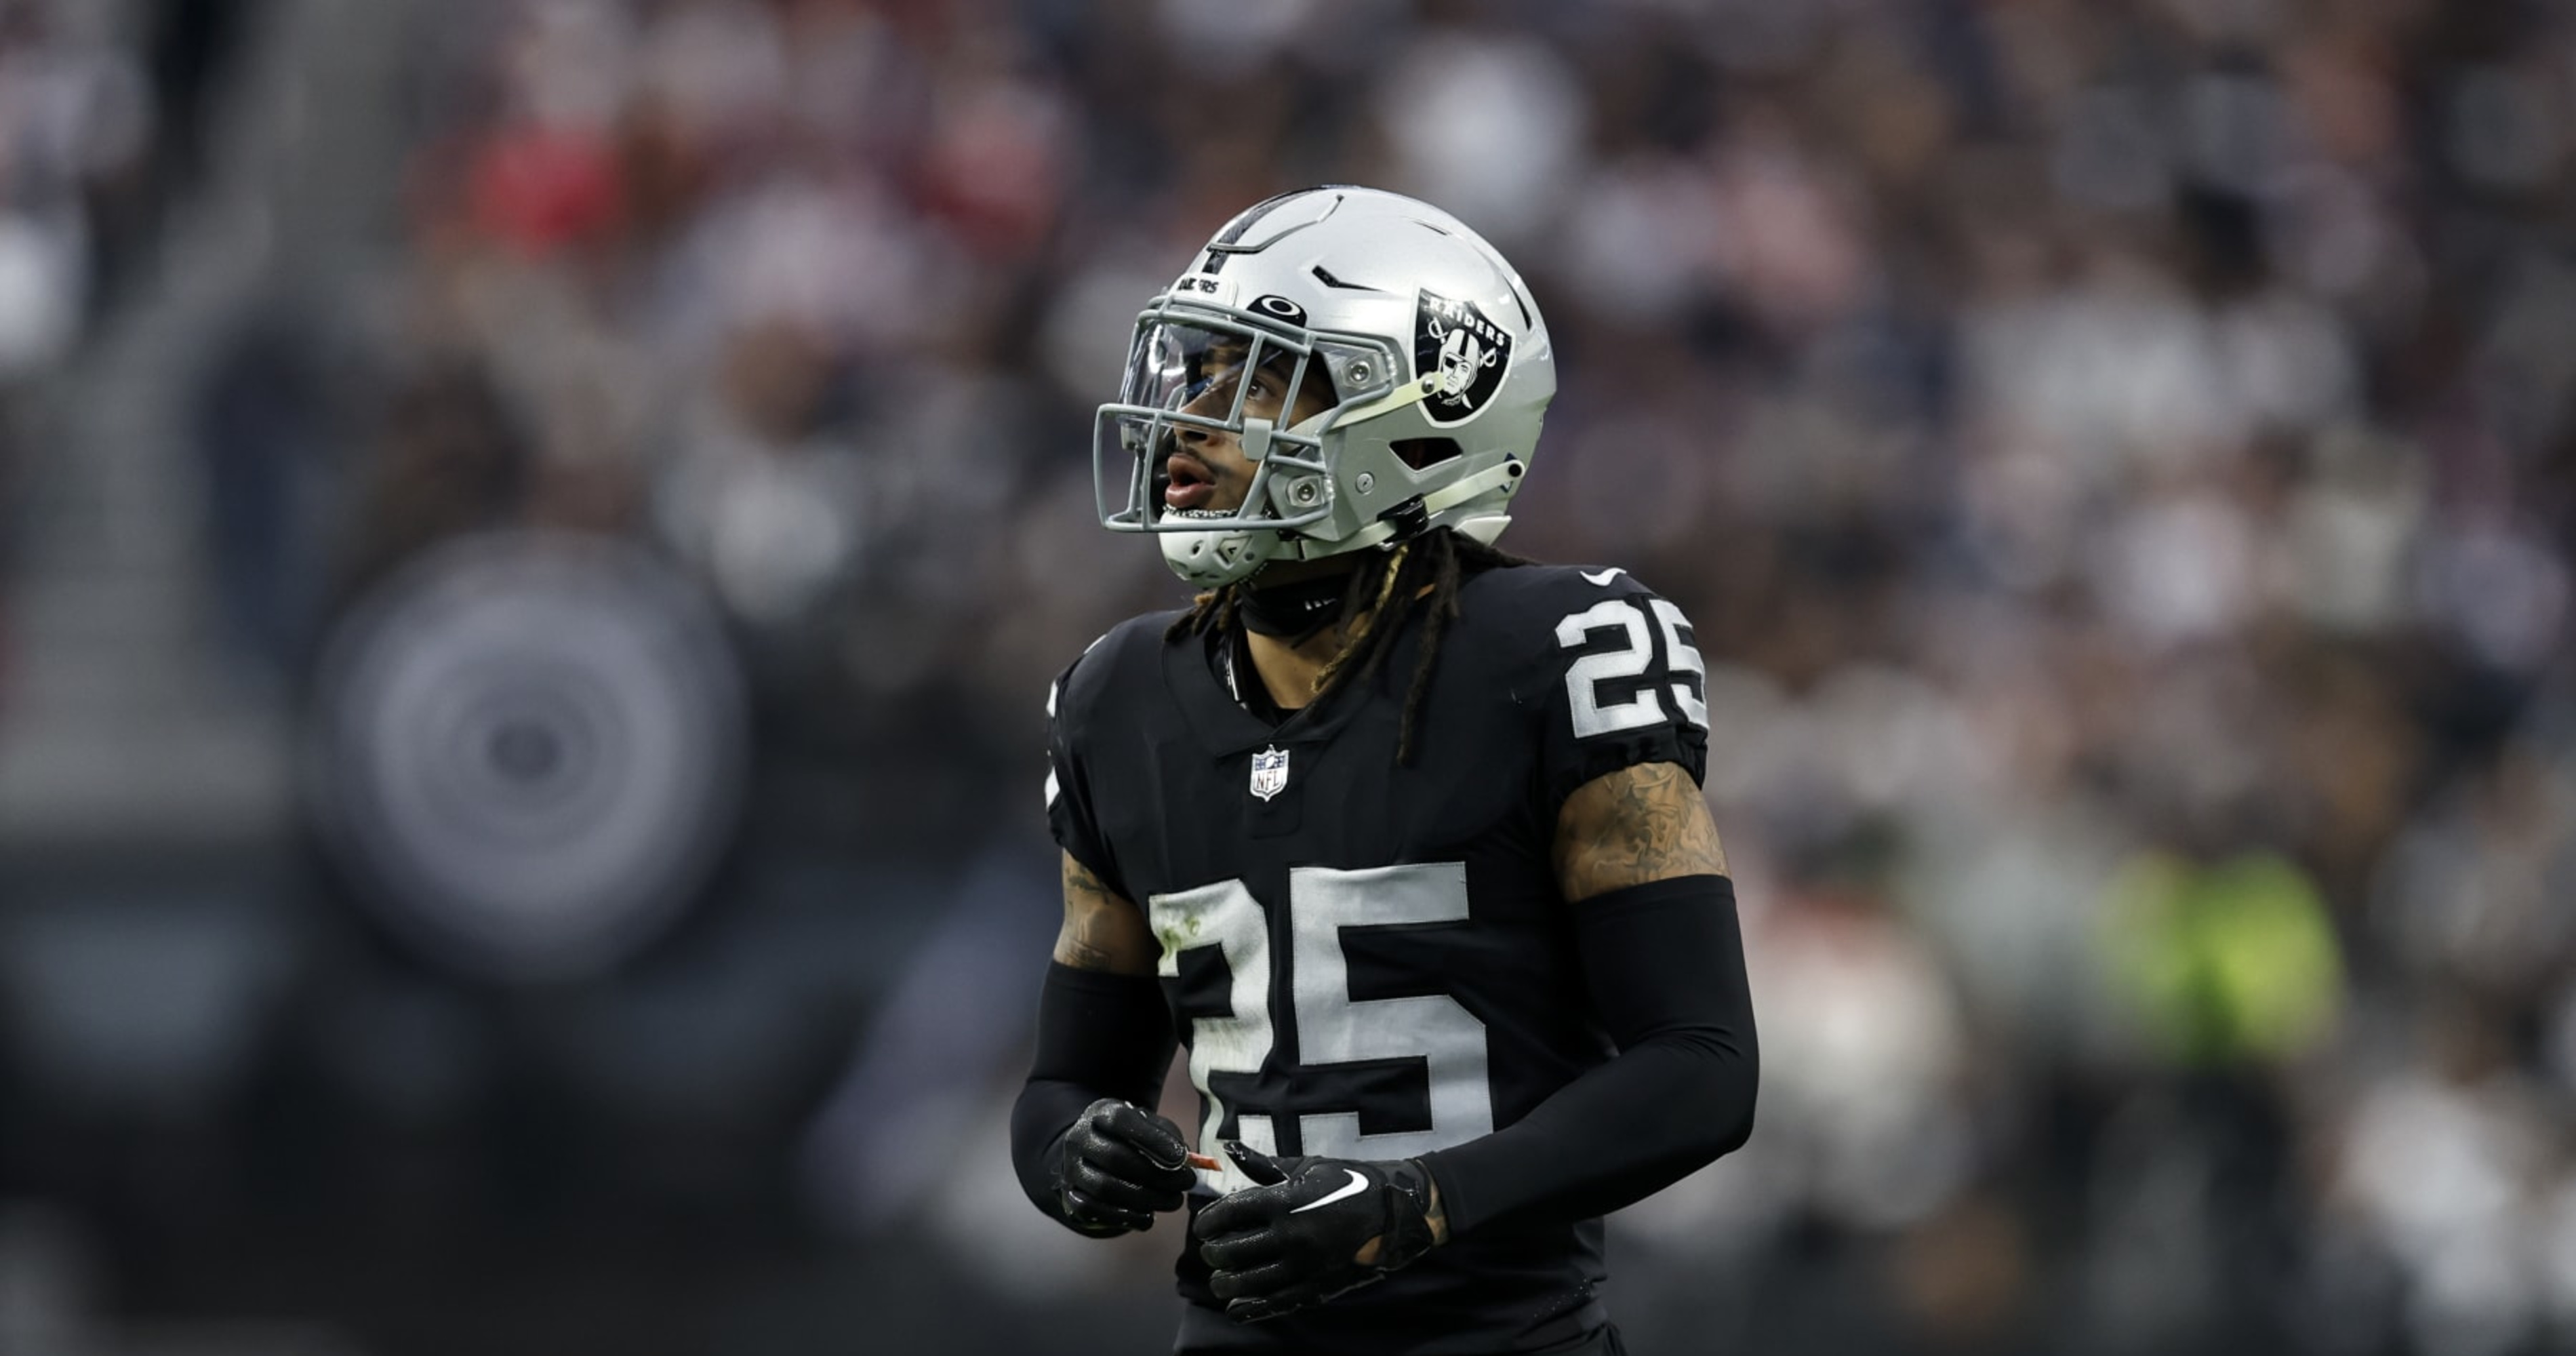 Many Raiders newcomers are not making the early grade